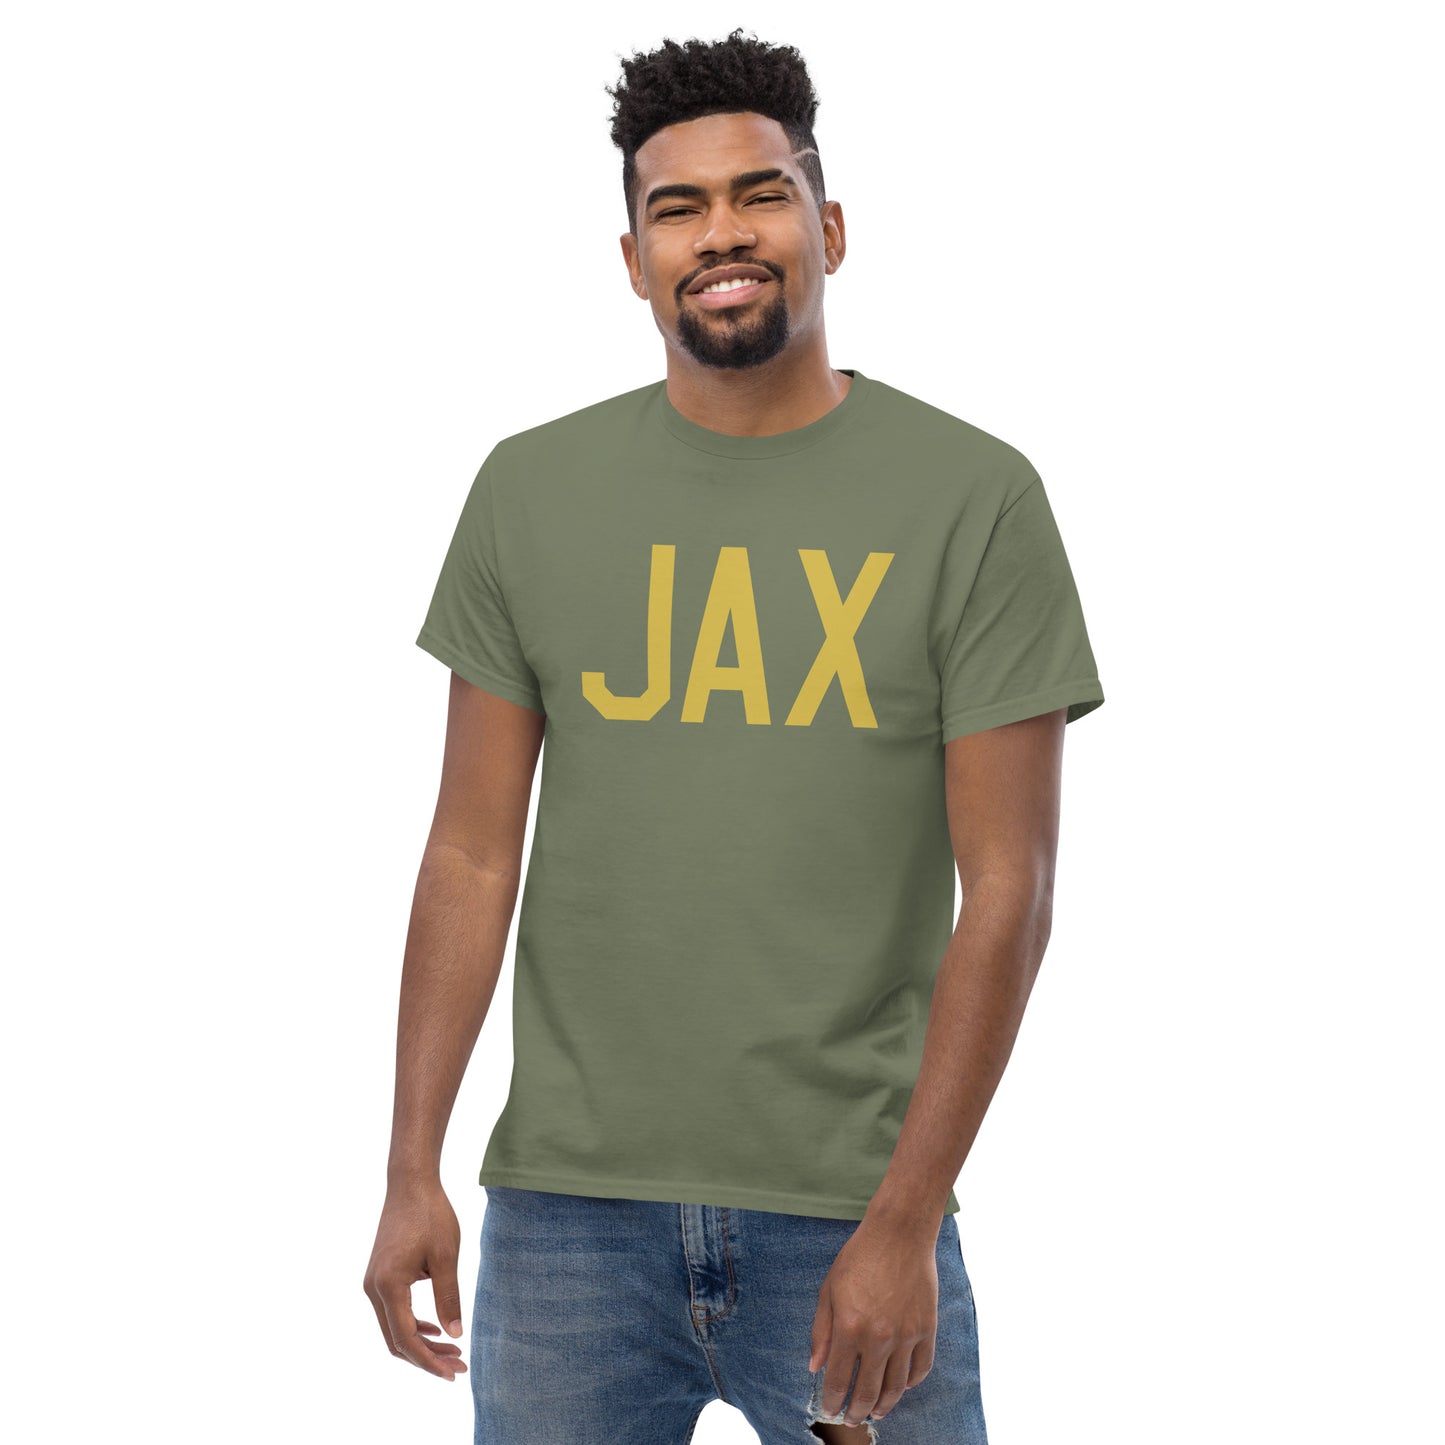 Aviation Enthusiast Men's Tee - Old Gold Graphic • JAX Jacksonville • YHM Designs - Image 06